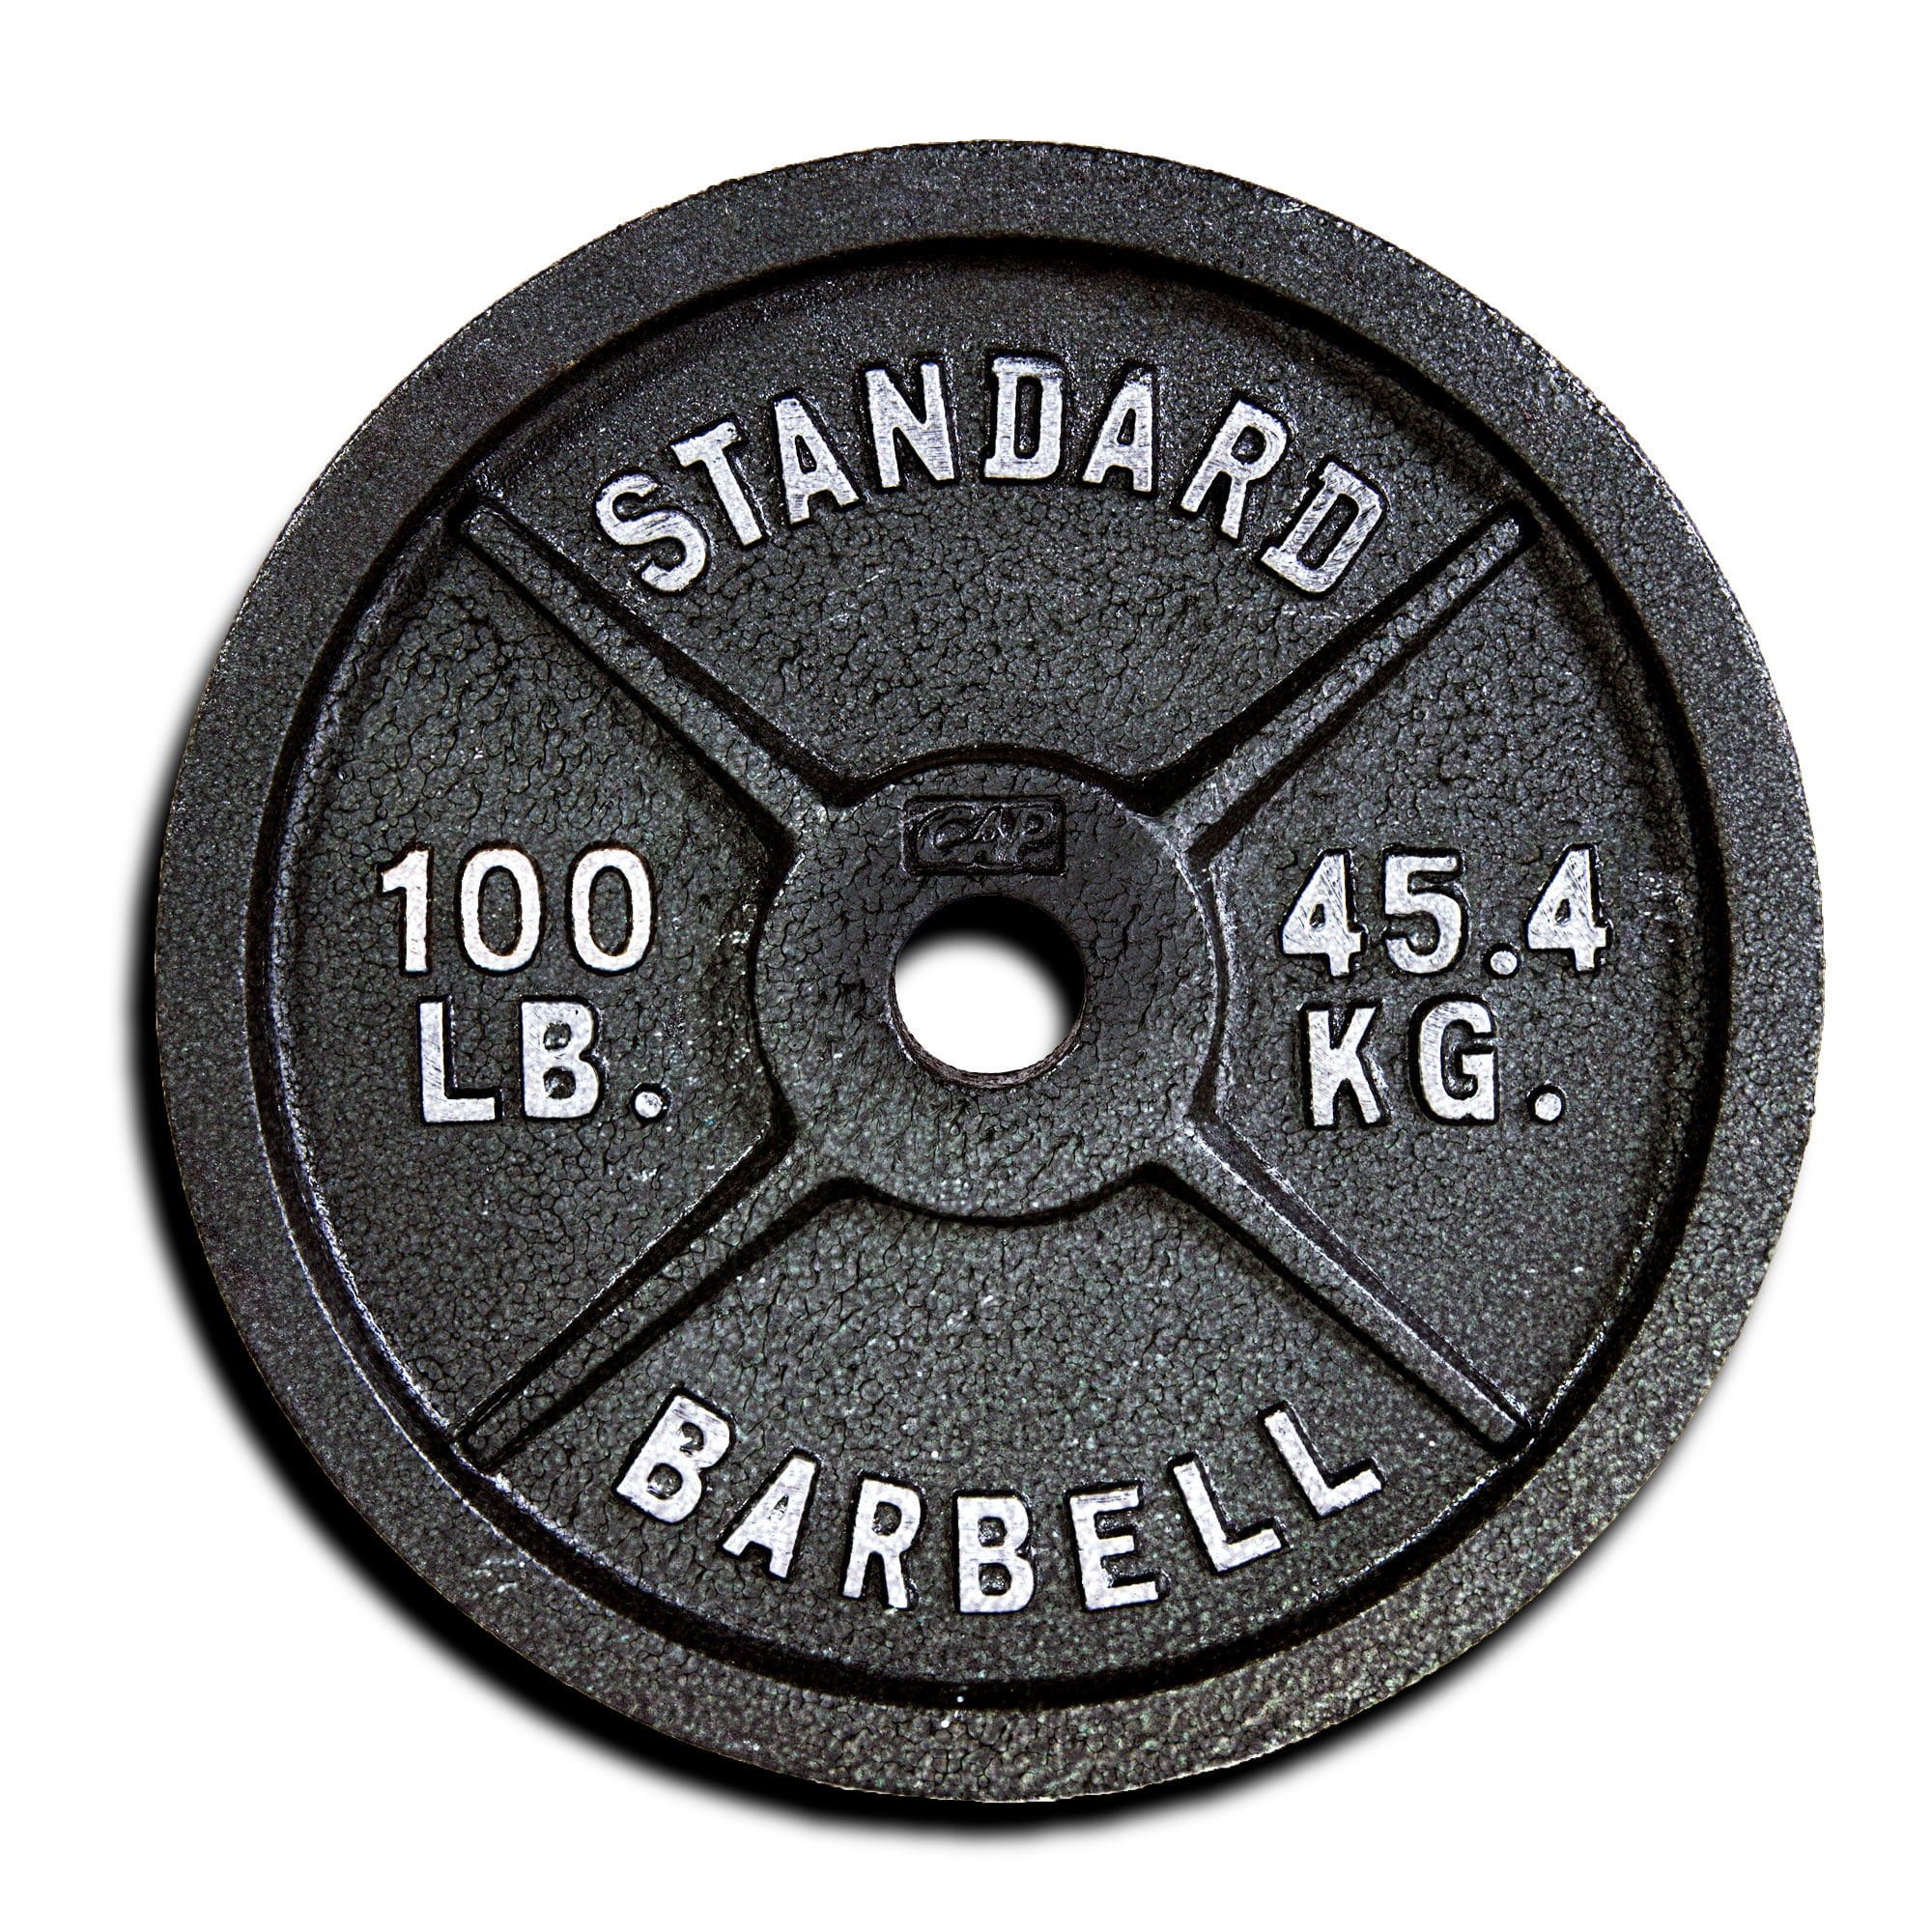 2.5LB-55LB Cast Iron Weight Plates Set 2-Inch Olympic Grip Plates